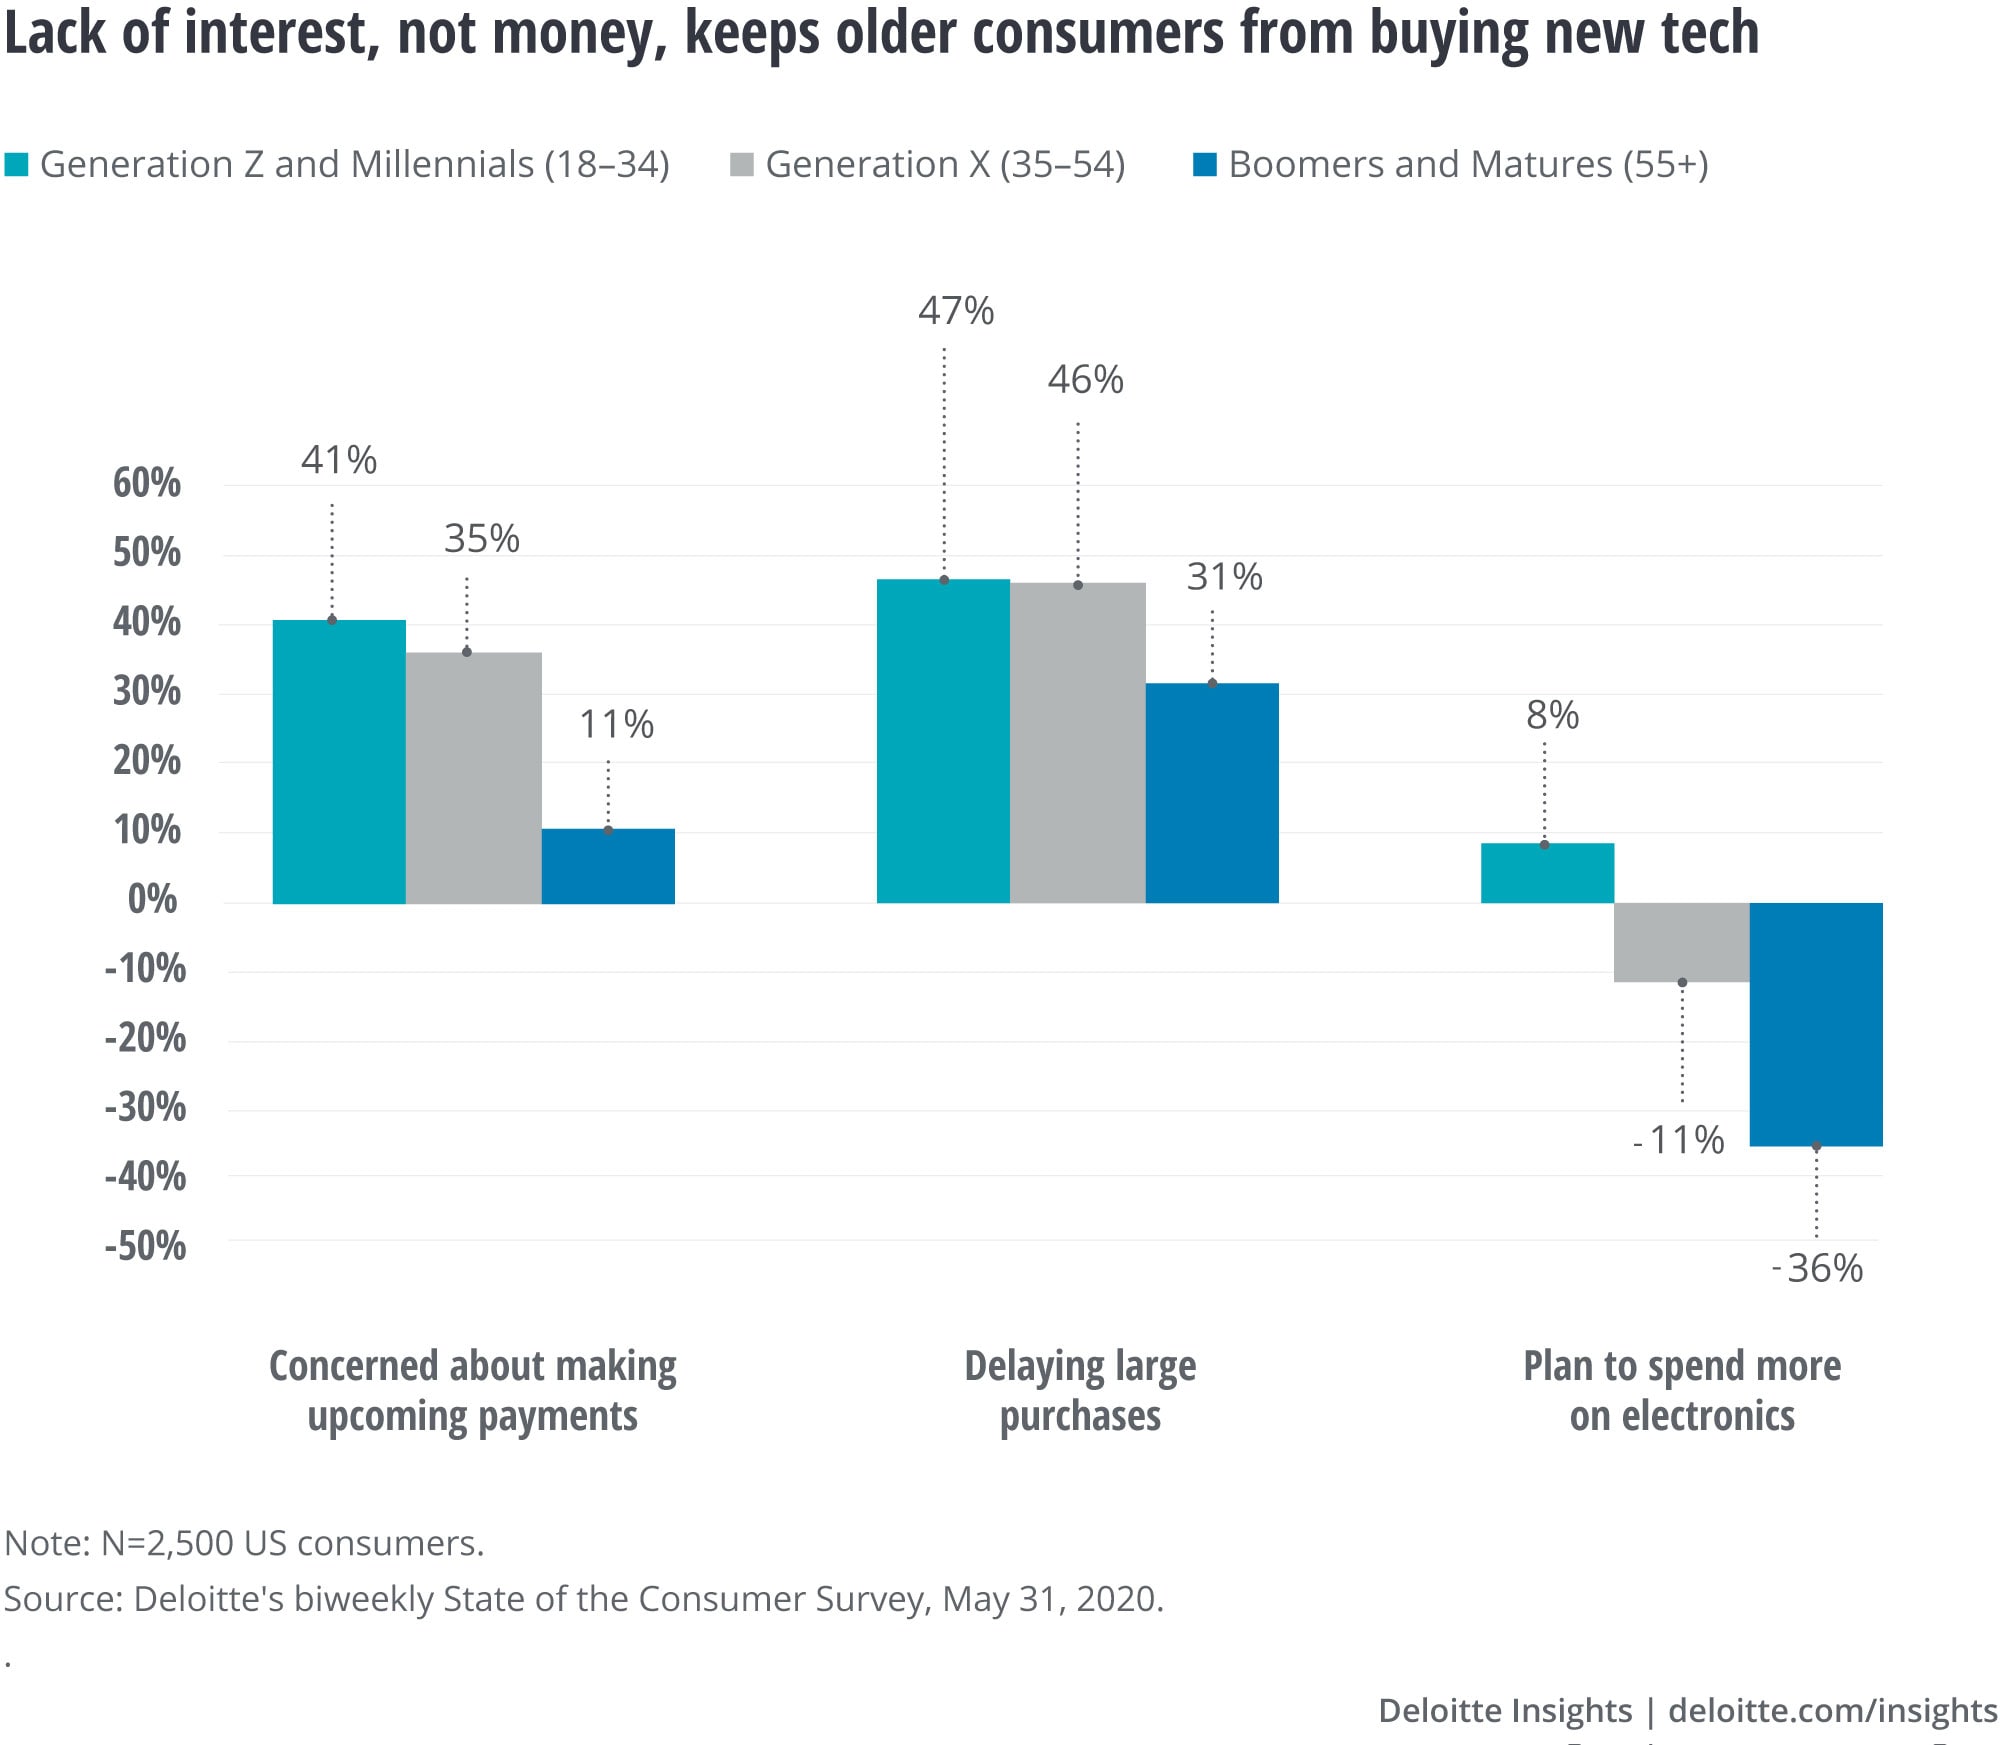 Lack of motivation, not money, keeps older consumers from buying new tech